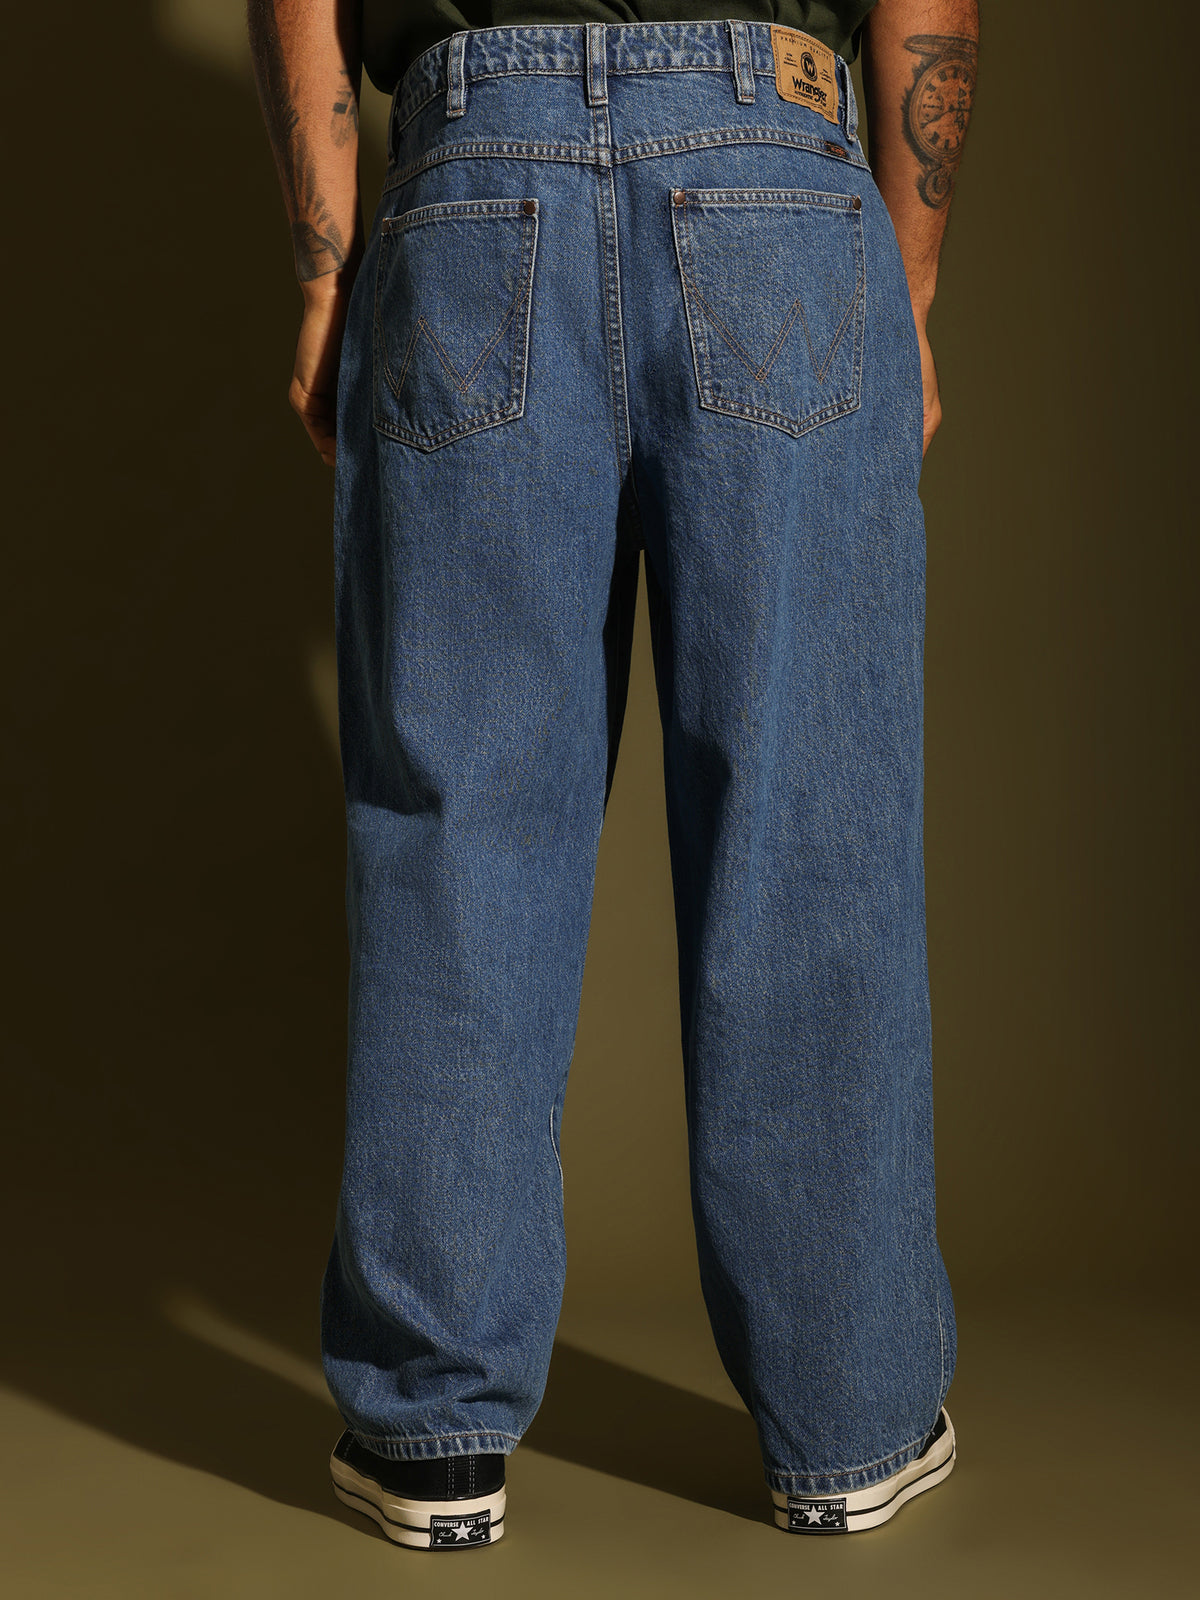 Super Baggy Jeans in Space Lord Mid Blue